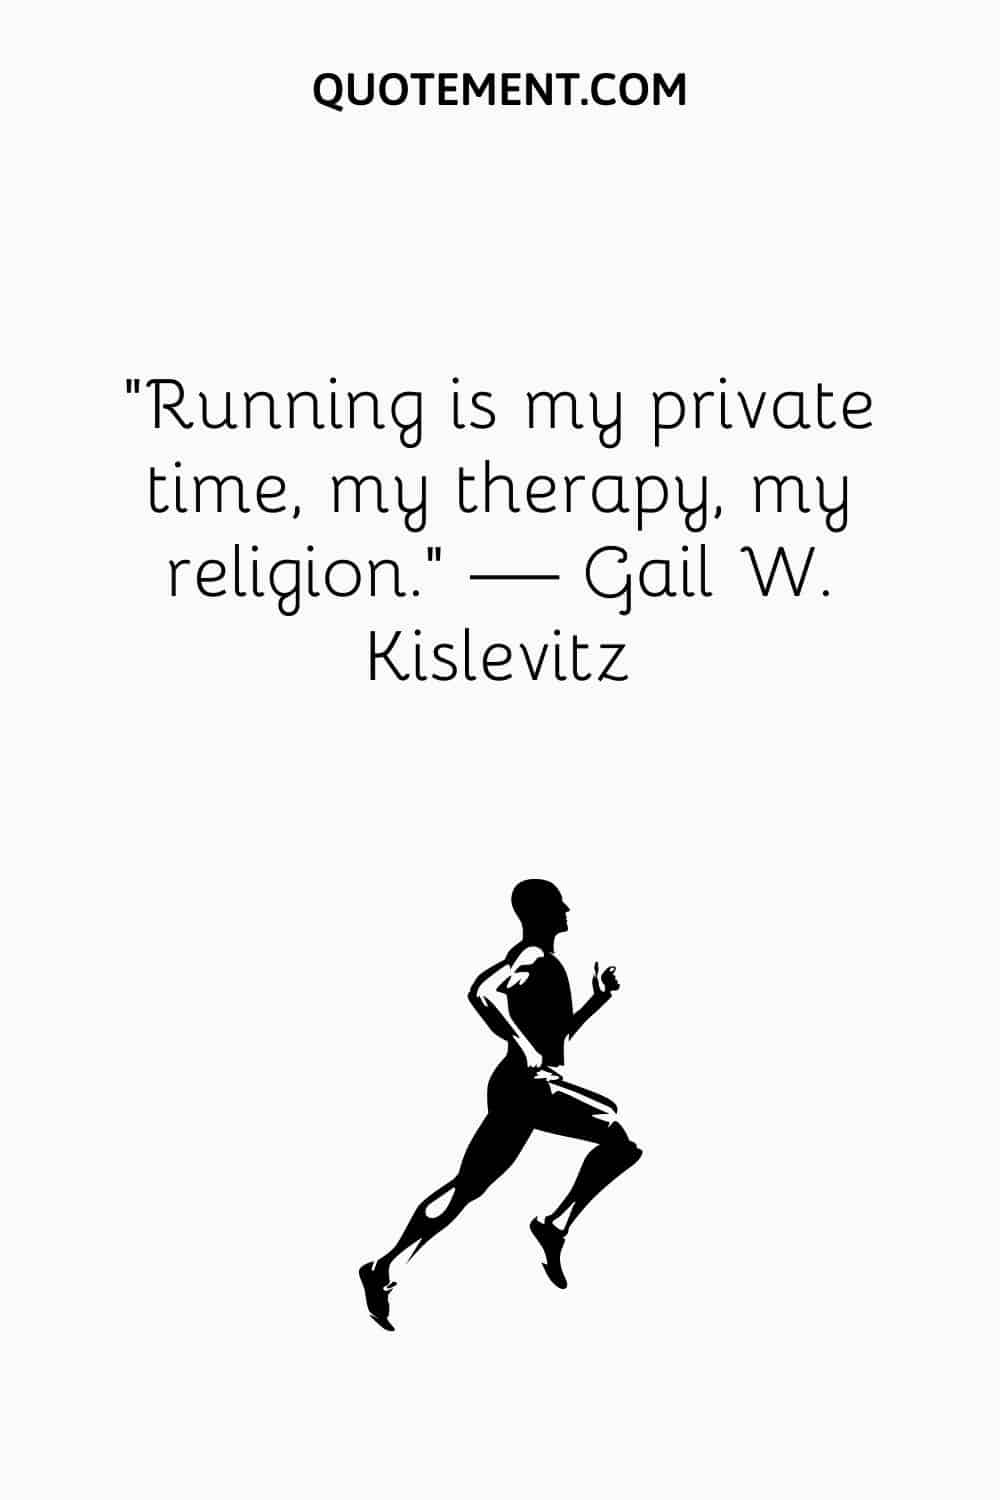 Running is my private time, my therapy, my religion